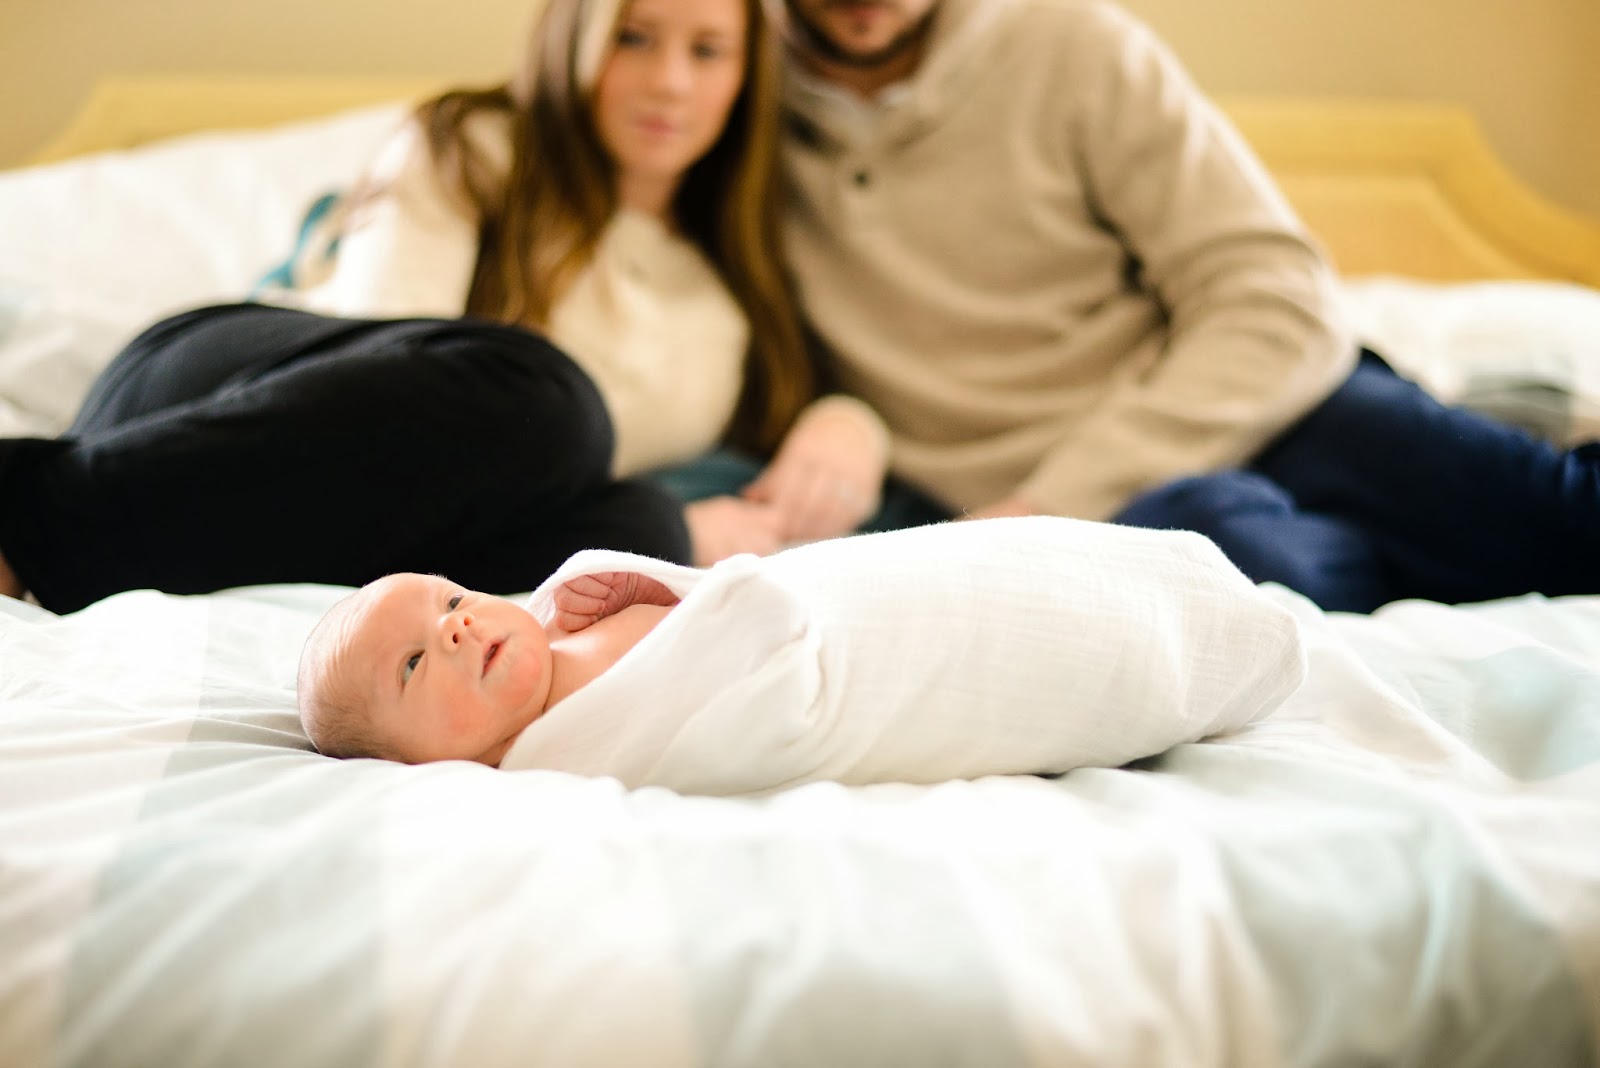 newborn swaddled on bed with Mom and Dad blurred behind